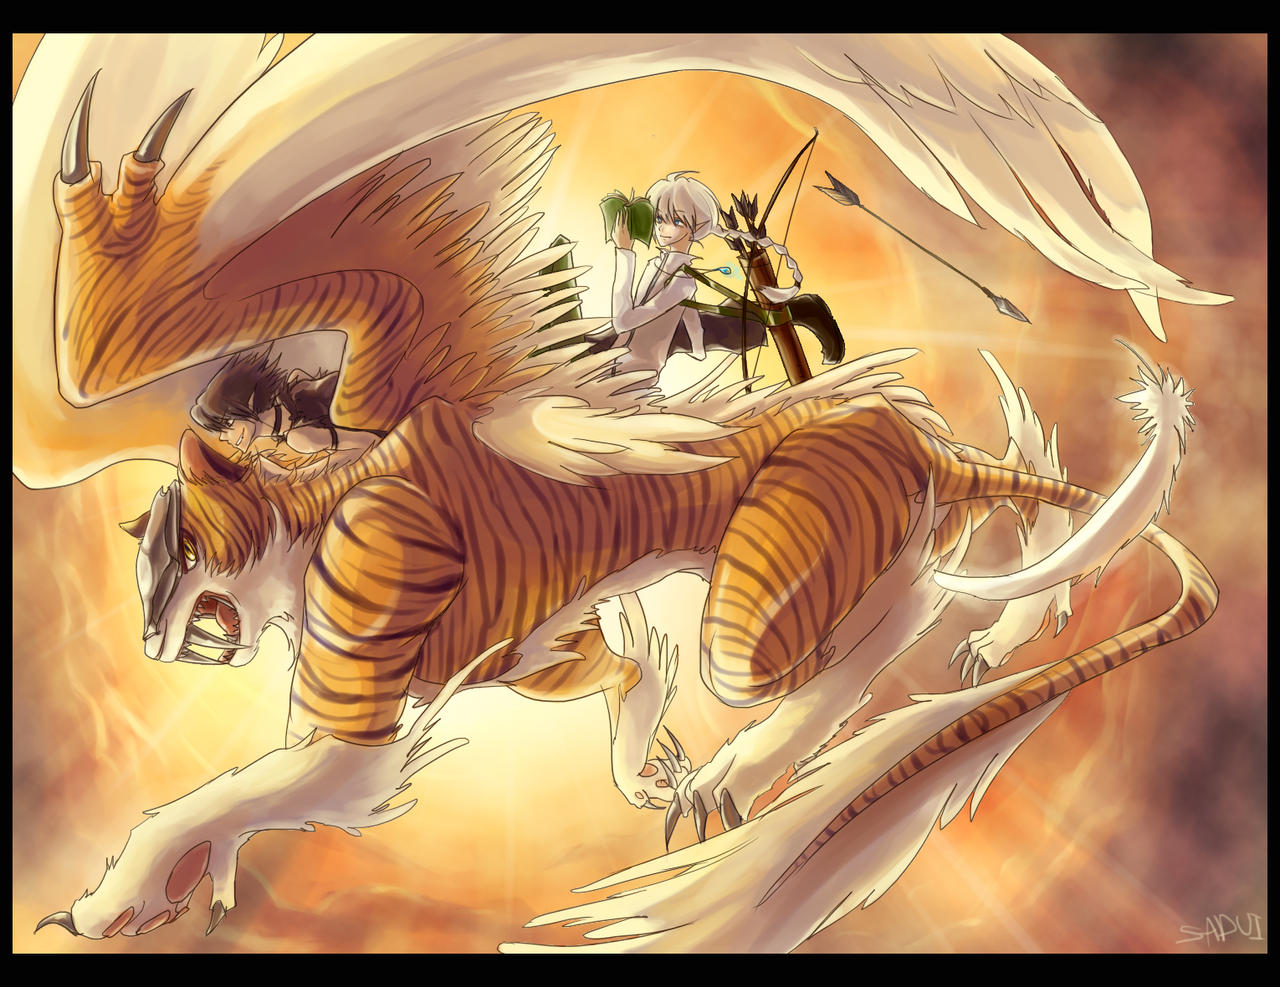 ceal___winged_tiger_by_sa_dui.jpg